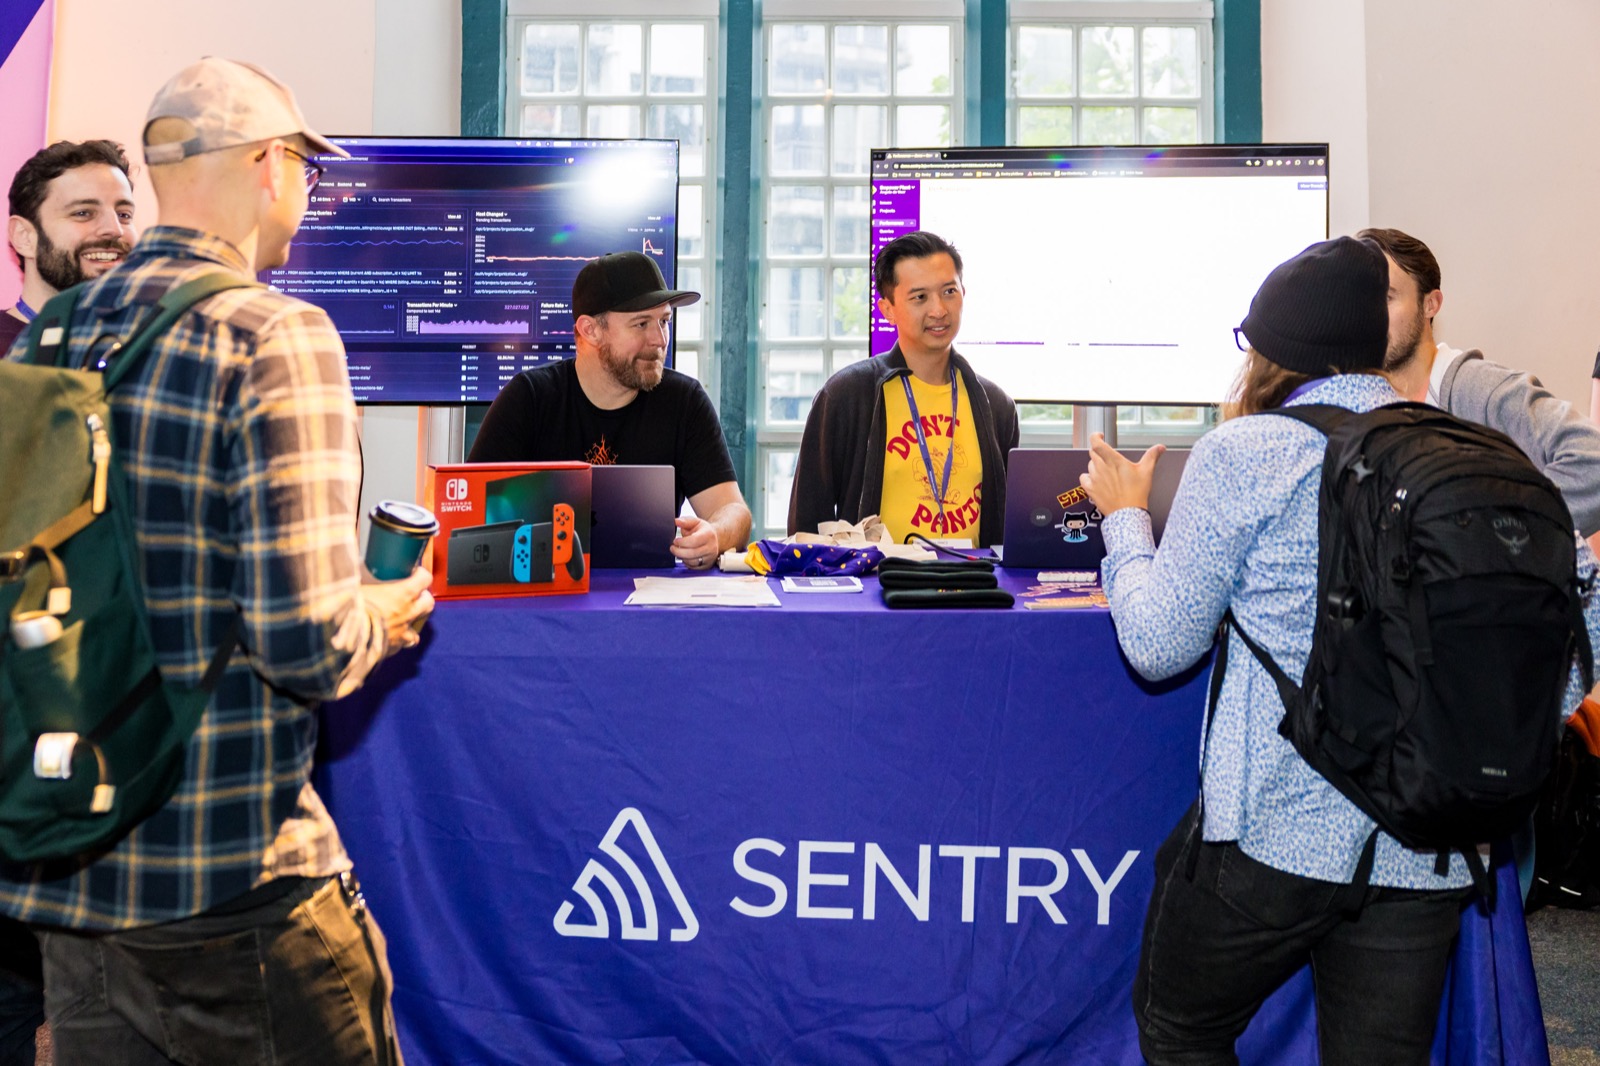 The Sentry booth at the venue as an example of a sponsor booth